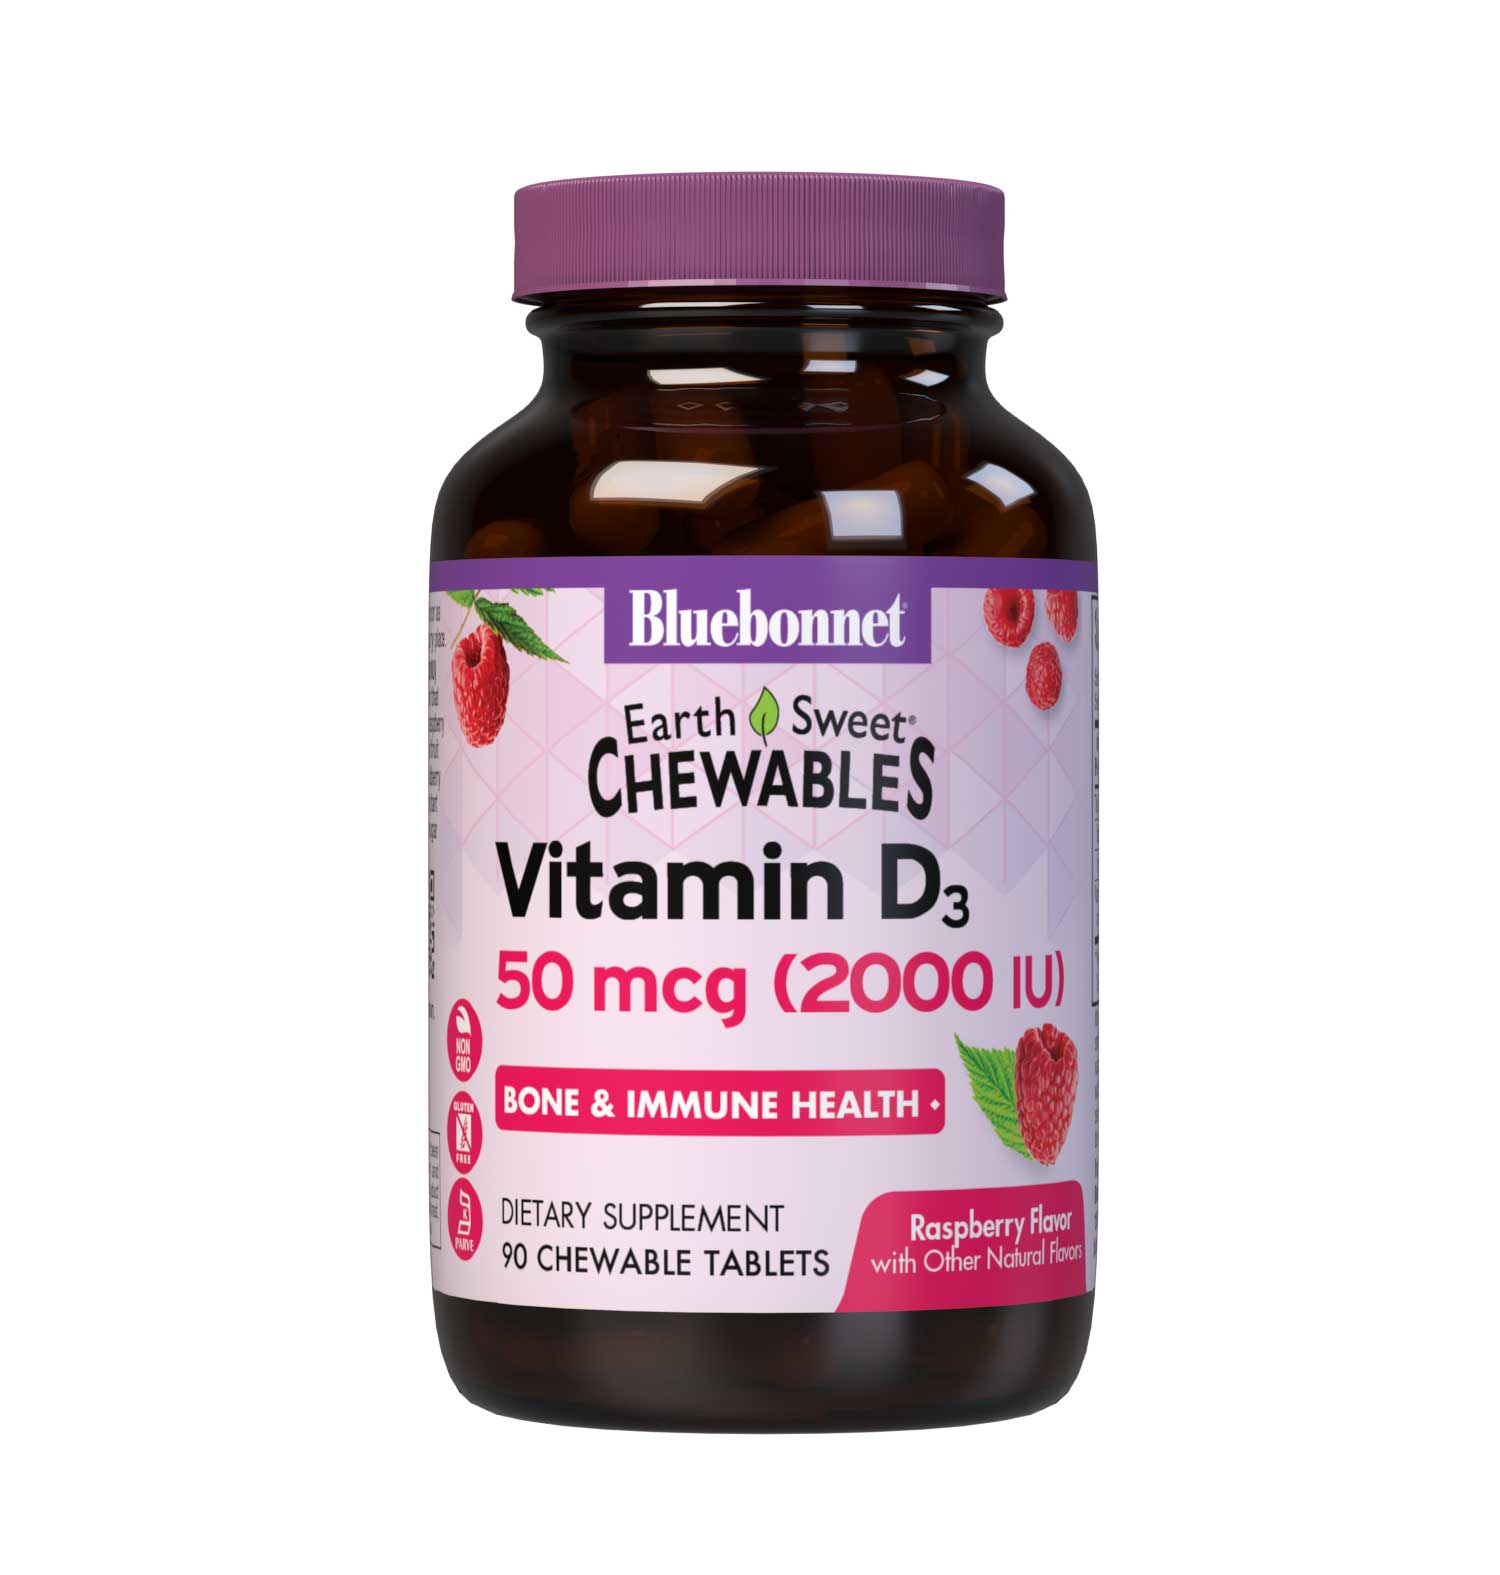 Bluebonnet’s EarthSweet Chewables Vitamin D3 50 mcg (2000 IU) 90 Chewable Tablets are formulated with vitamin D3 (cholecalciferol) from lanolin that supports strong bones and immune function in a delicious raspberry flavor. #size_90 count